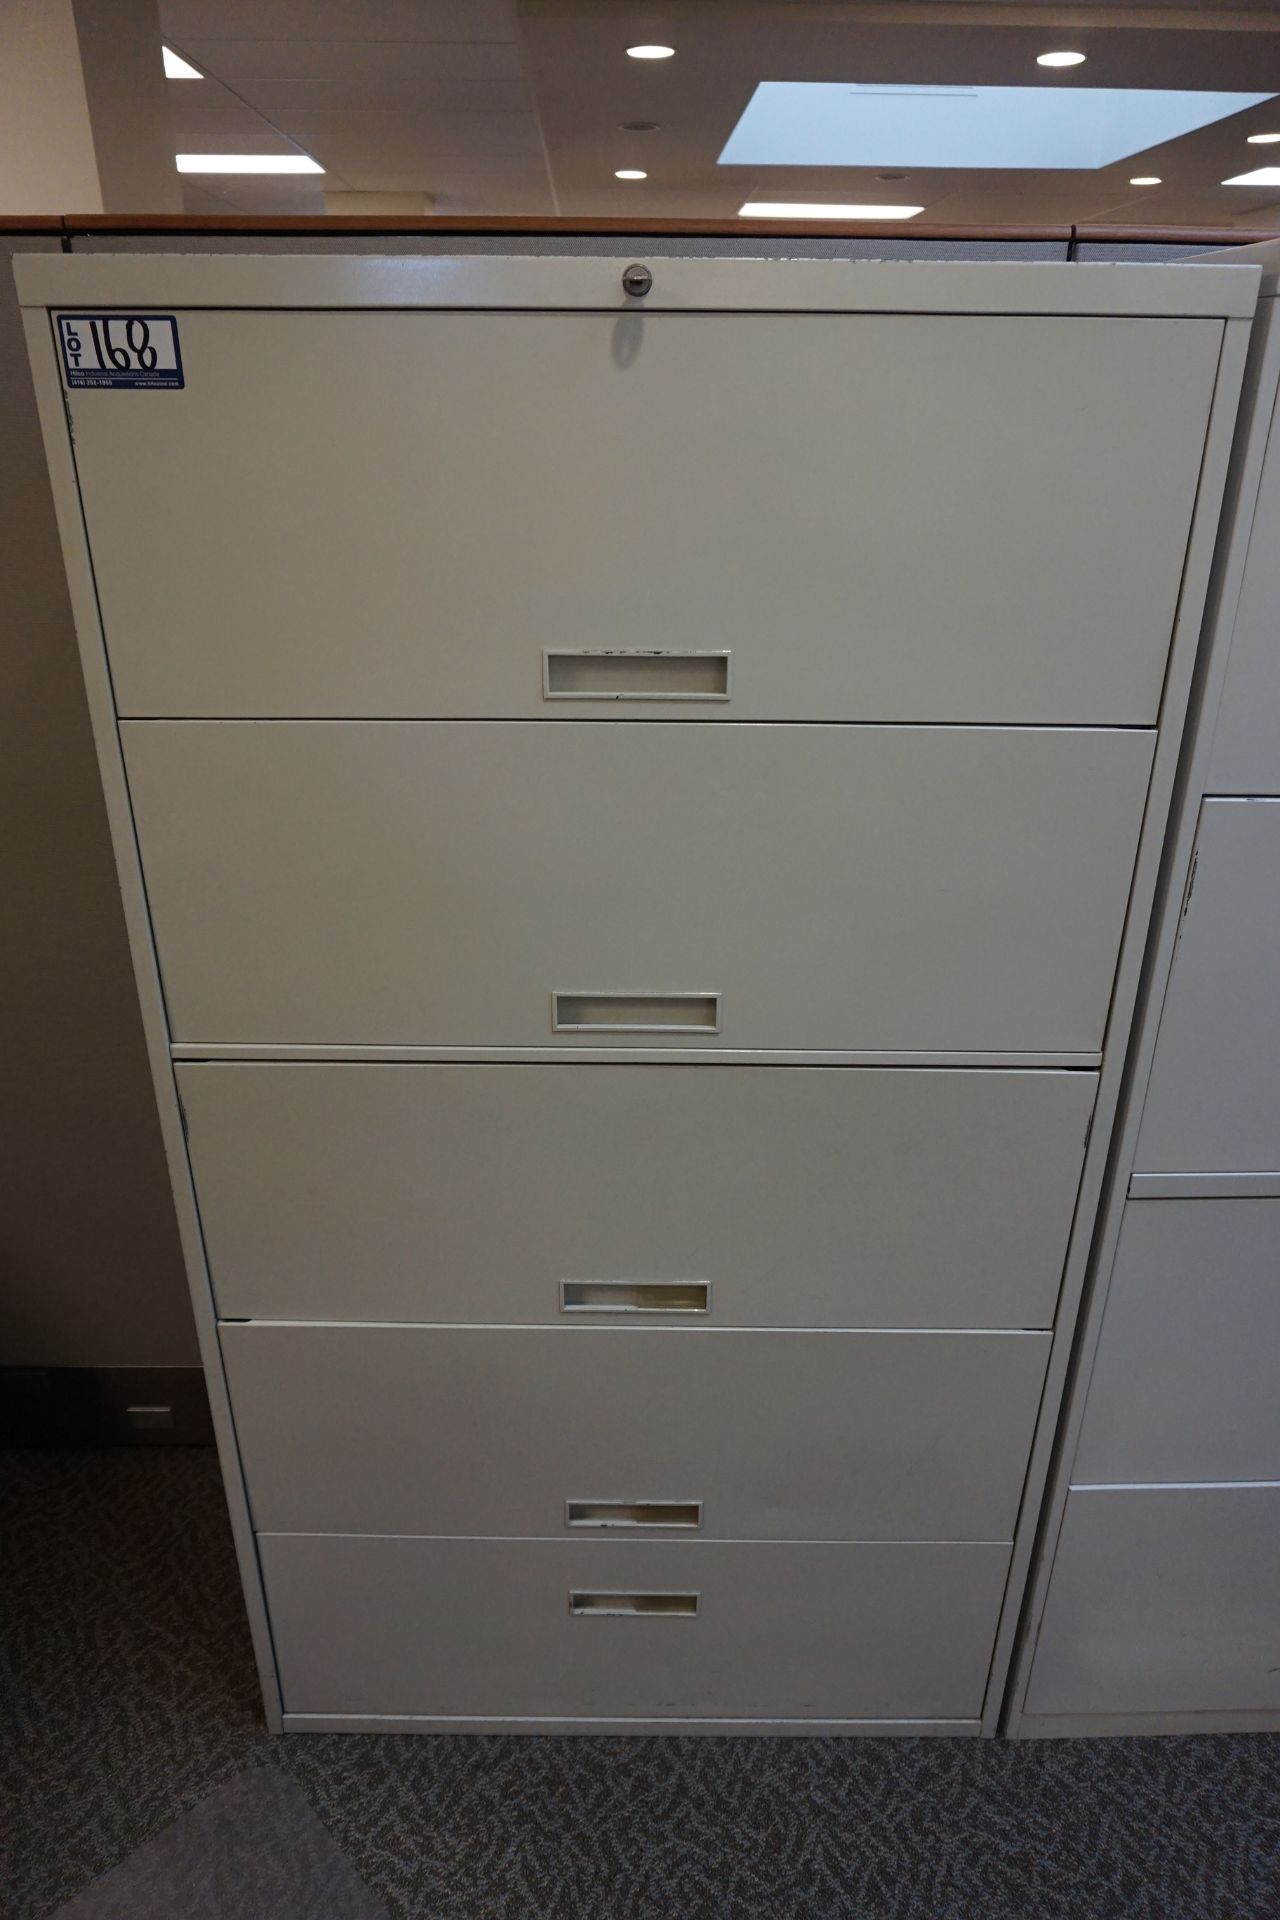 Asst. 5-Drawer Lateral File Cabinets - Image 3 of 3